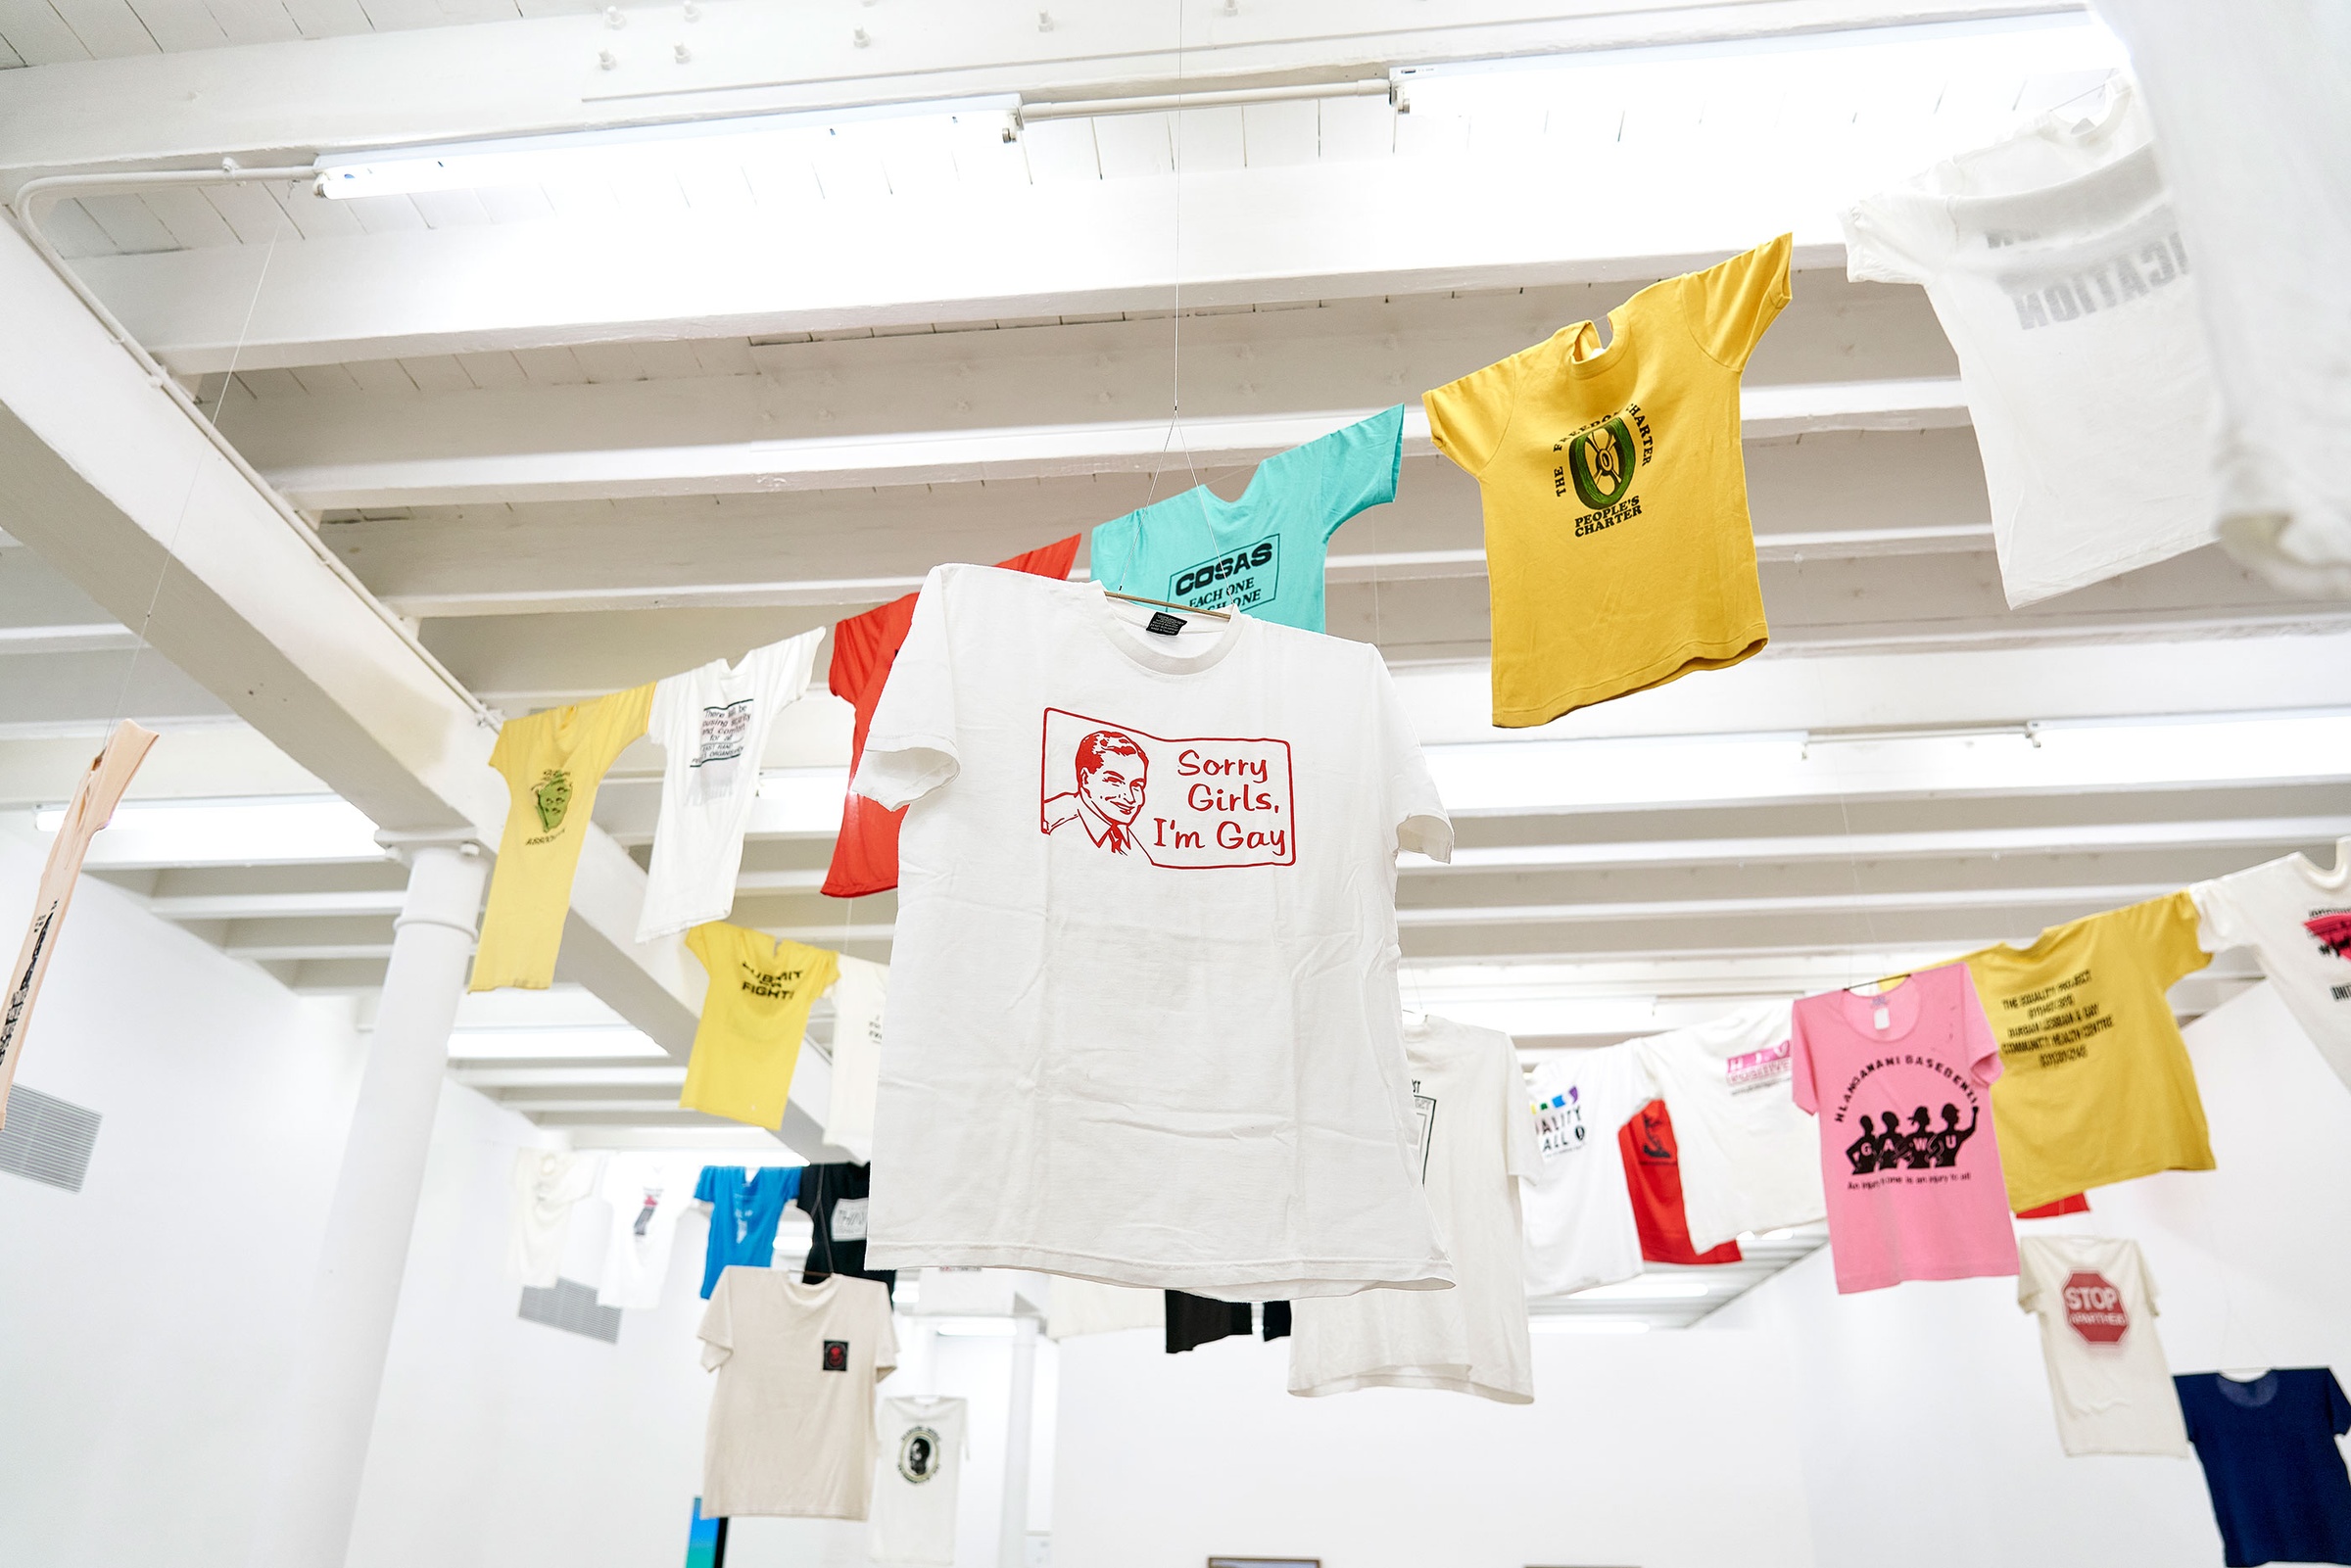 Installation photograph of the Common exhibition. Above, T-shirts with slogans from the GALA Queer Archive and SAHA are suspended on crossing lines. One white T-shirt features an image of a man’s smiling face and reads "Sorry Girls, I’m Gay.”
